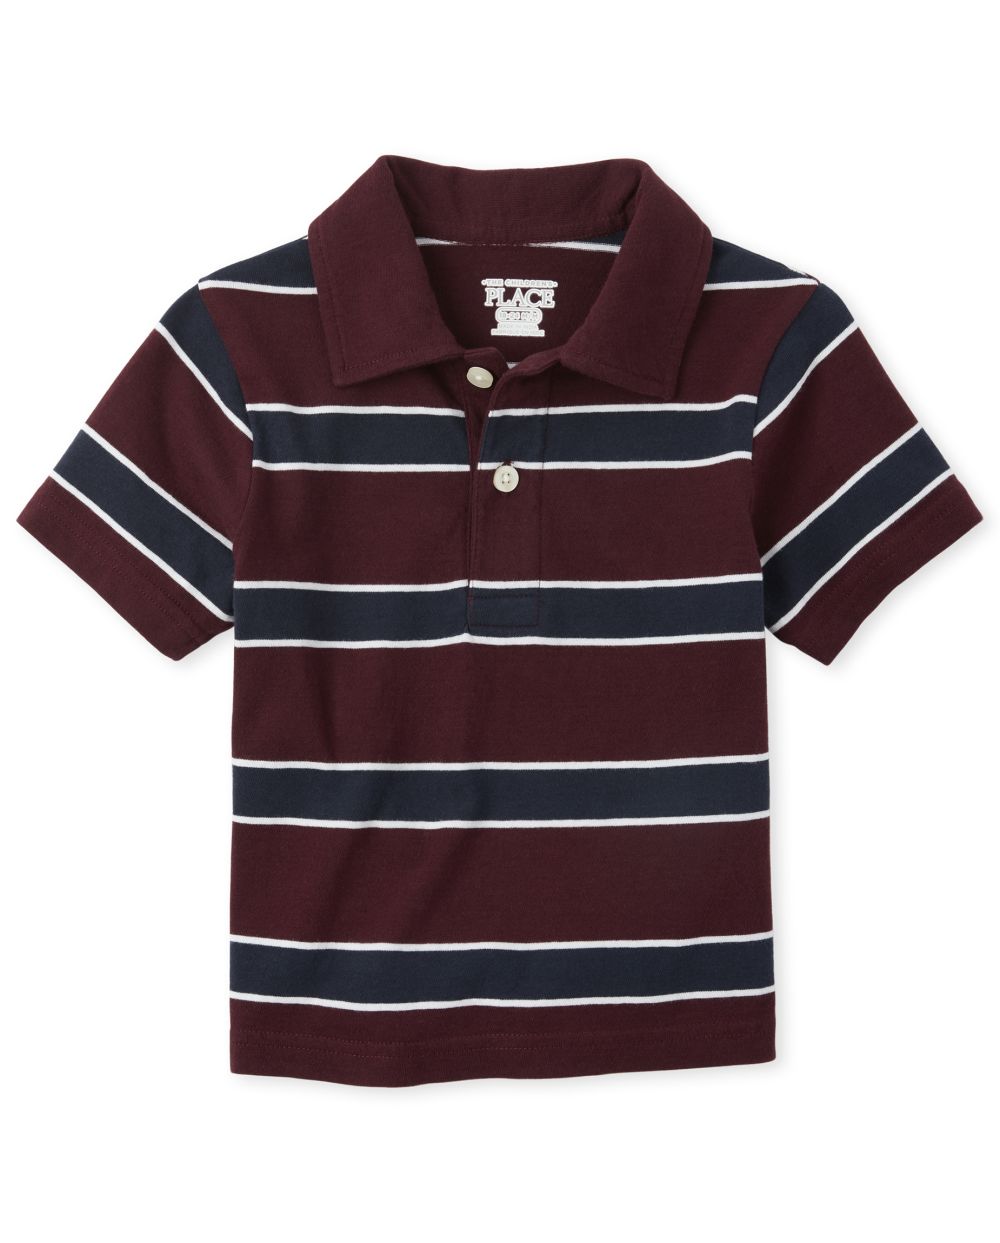 Baby And Toddler Boys Short Sleeve Striped Jersey Polo